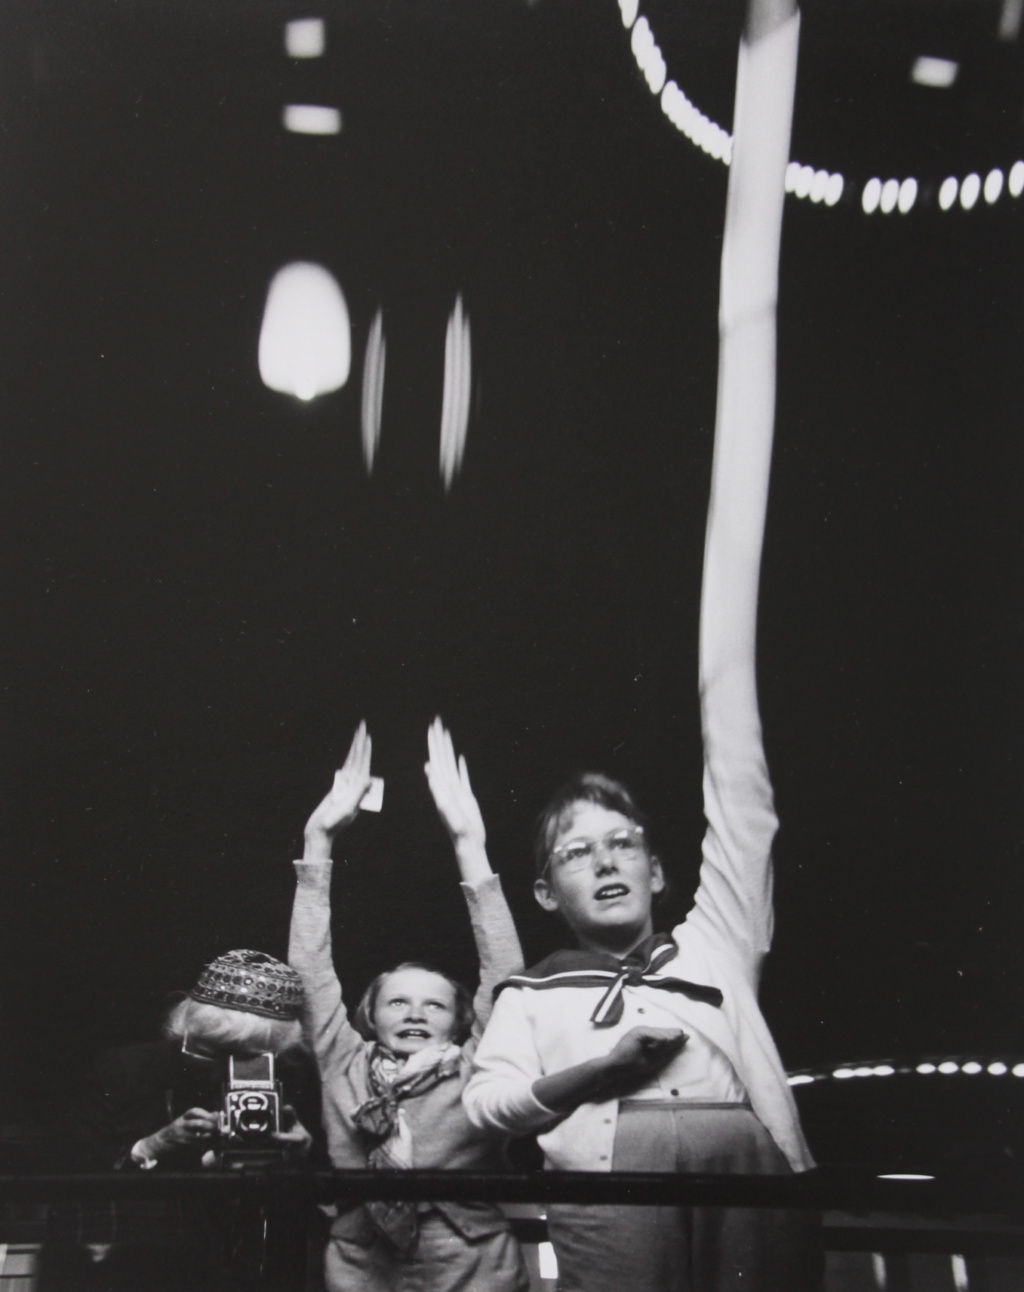 Imogen Cunningham, Self Portrait with Grandchildren in SF Funhouse, 1955
Vintage gelatin silver print, mounted on cardboard, printed later
17,8 x 22,2 cm (image)
Signed, dated on mount by photographer verso and labeled (title, date, address) recto